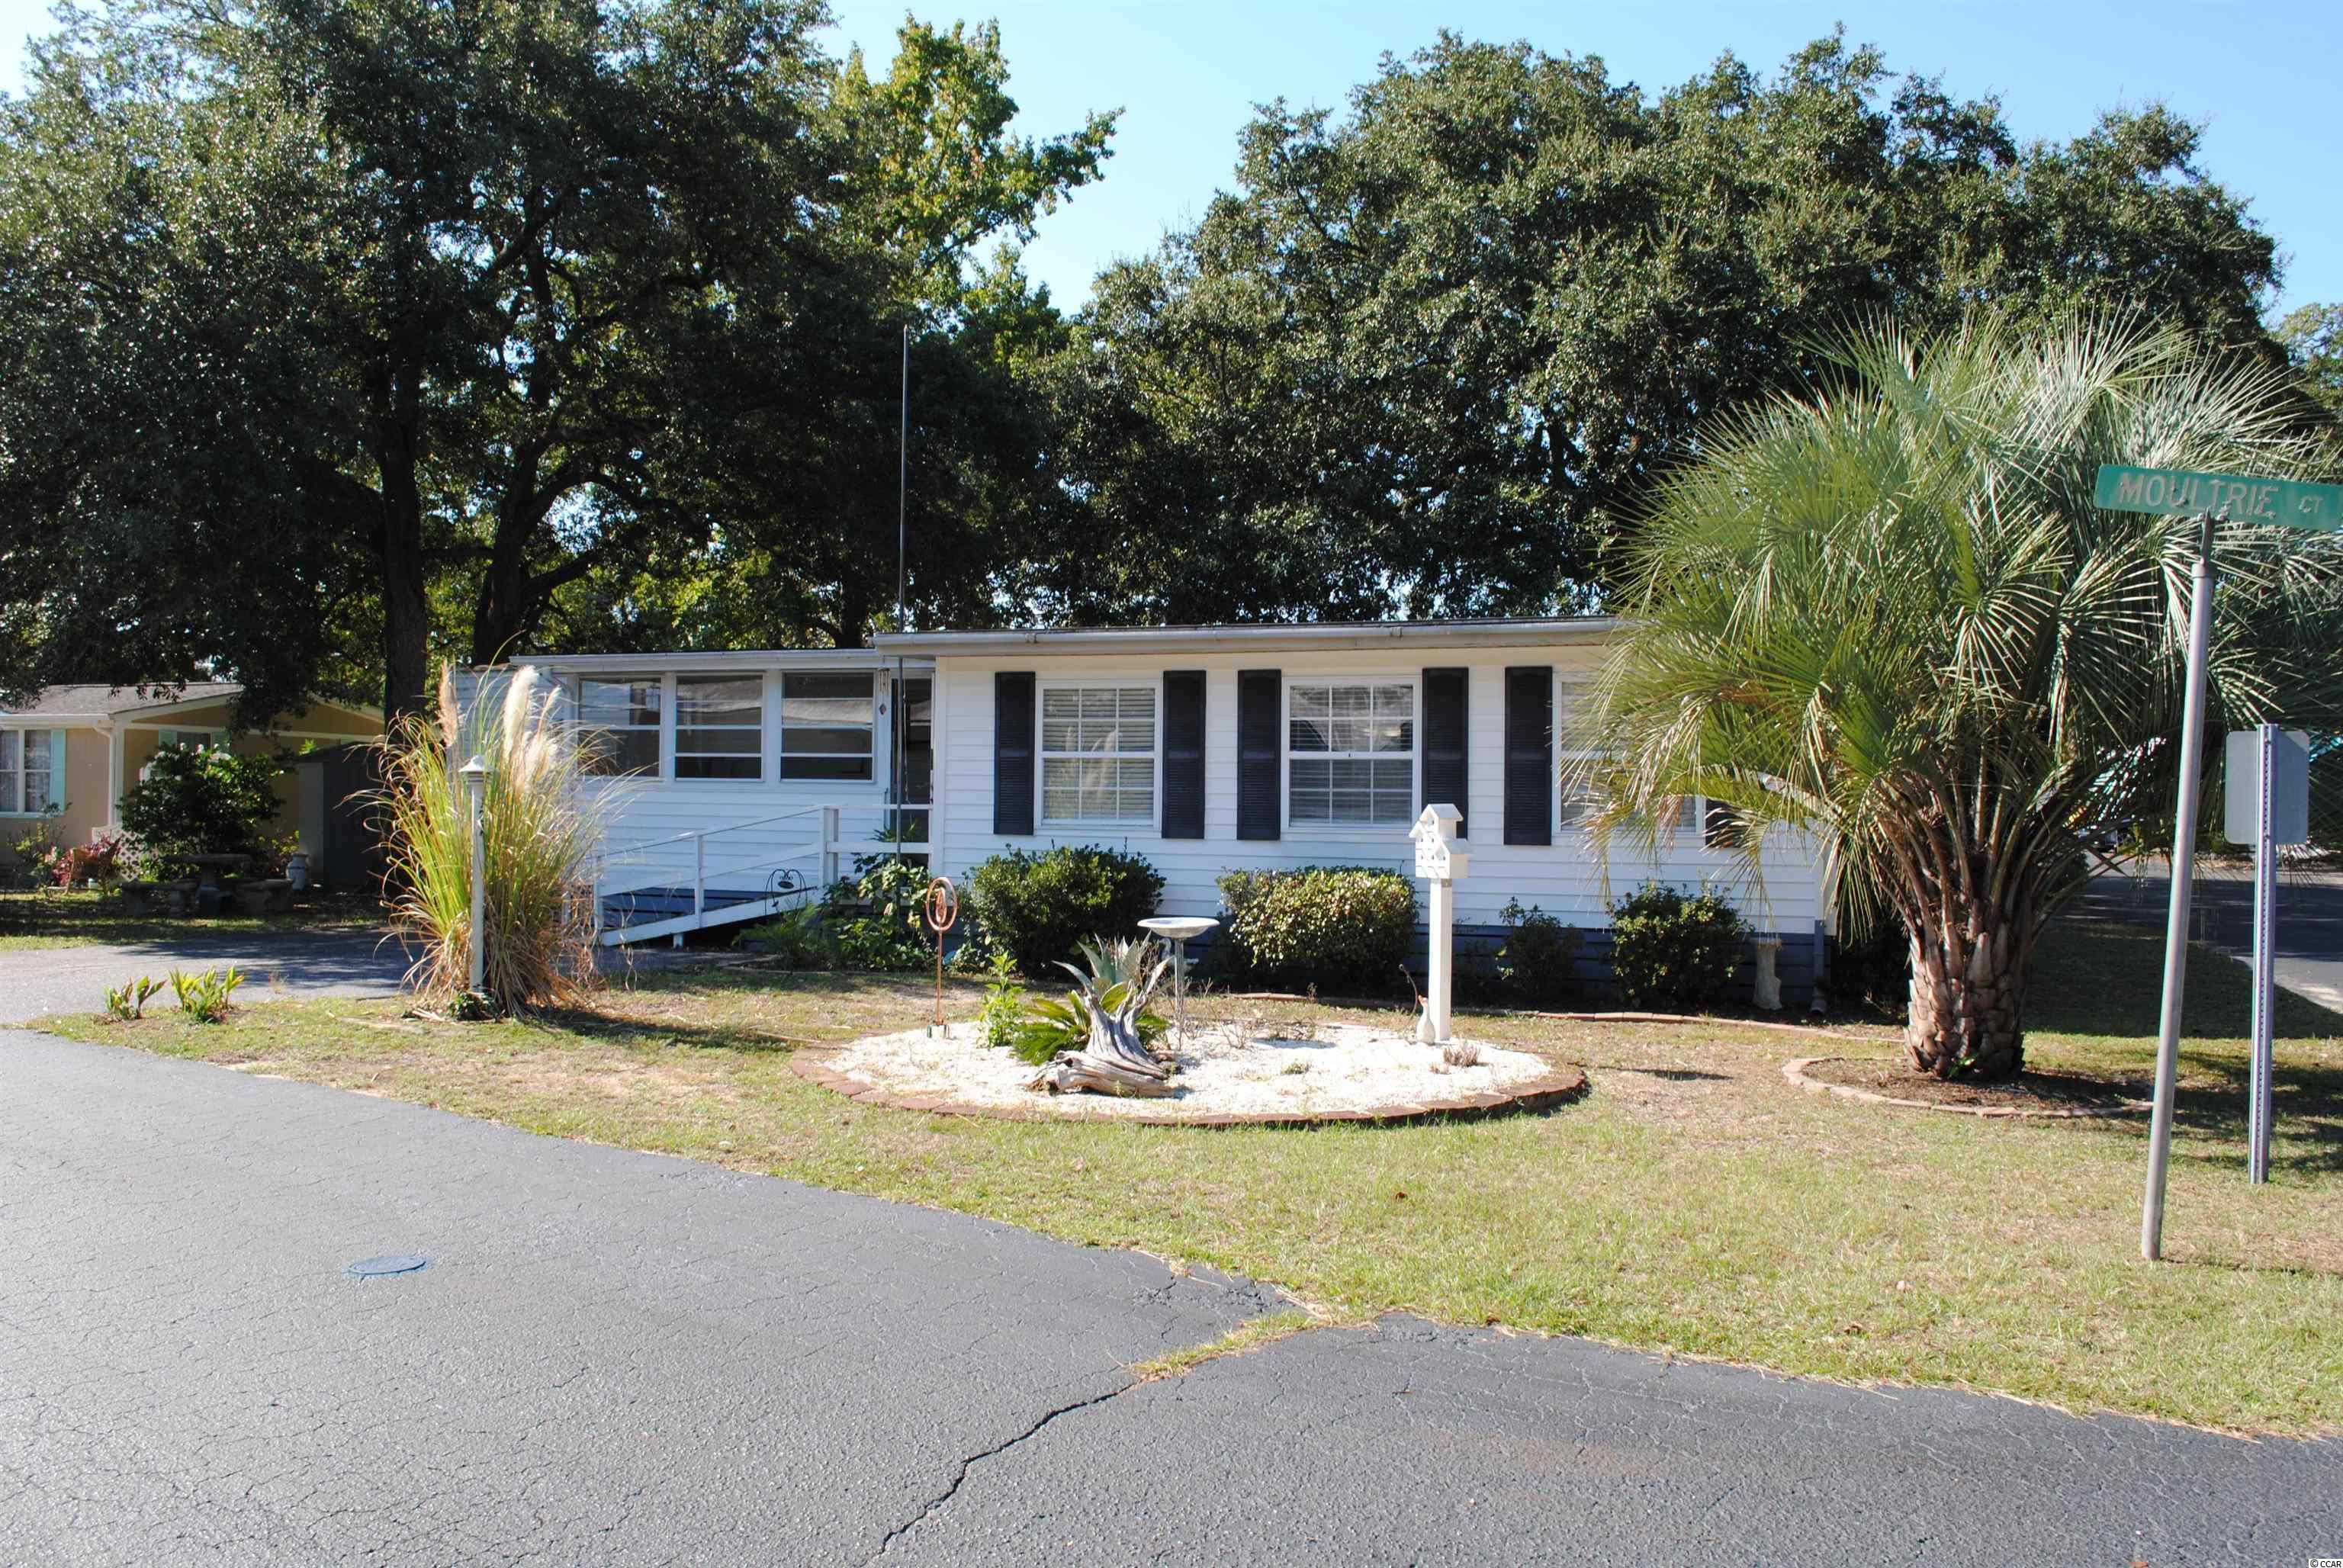 127 Moultrie Ct. Murrells Inlet, SC 29576